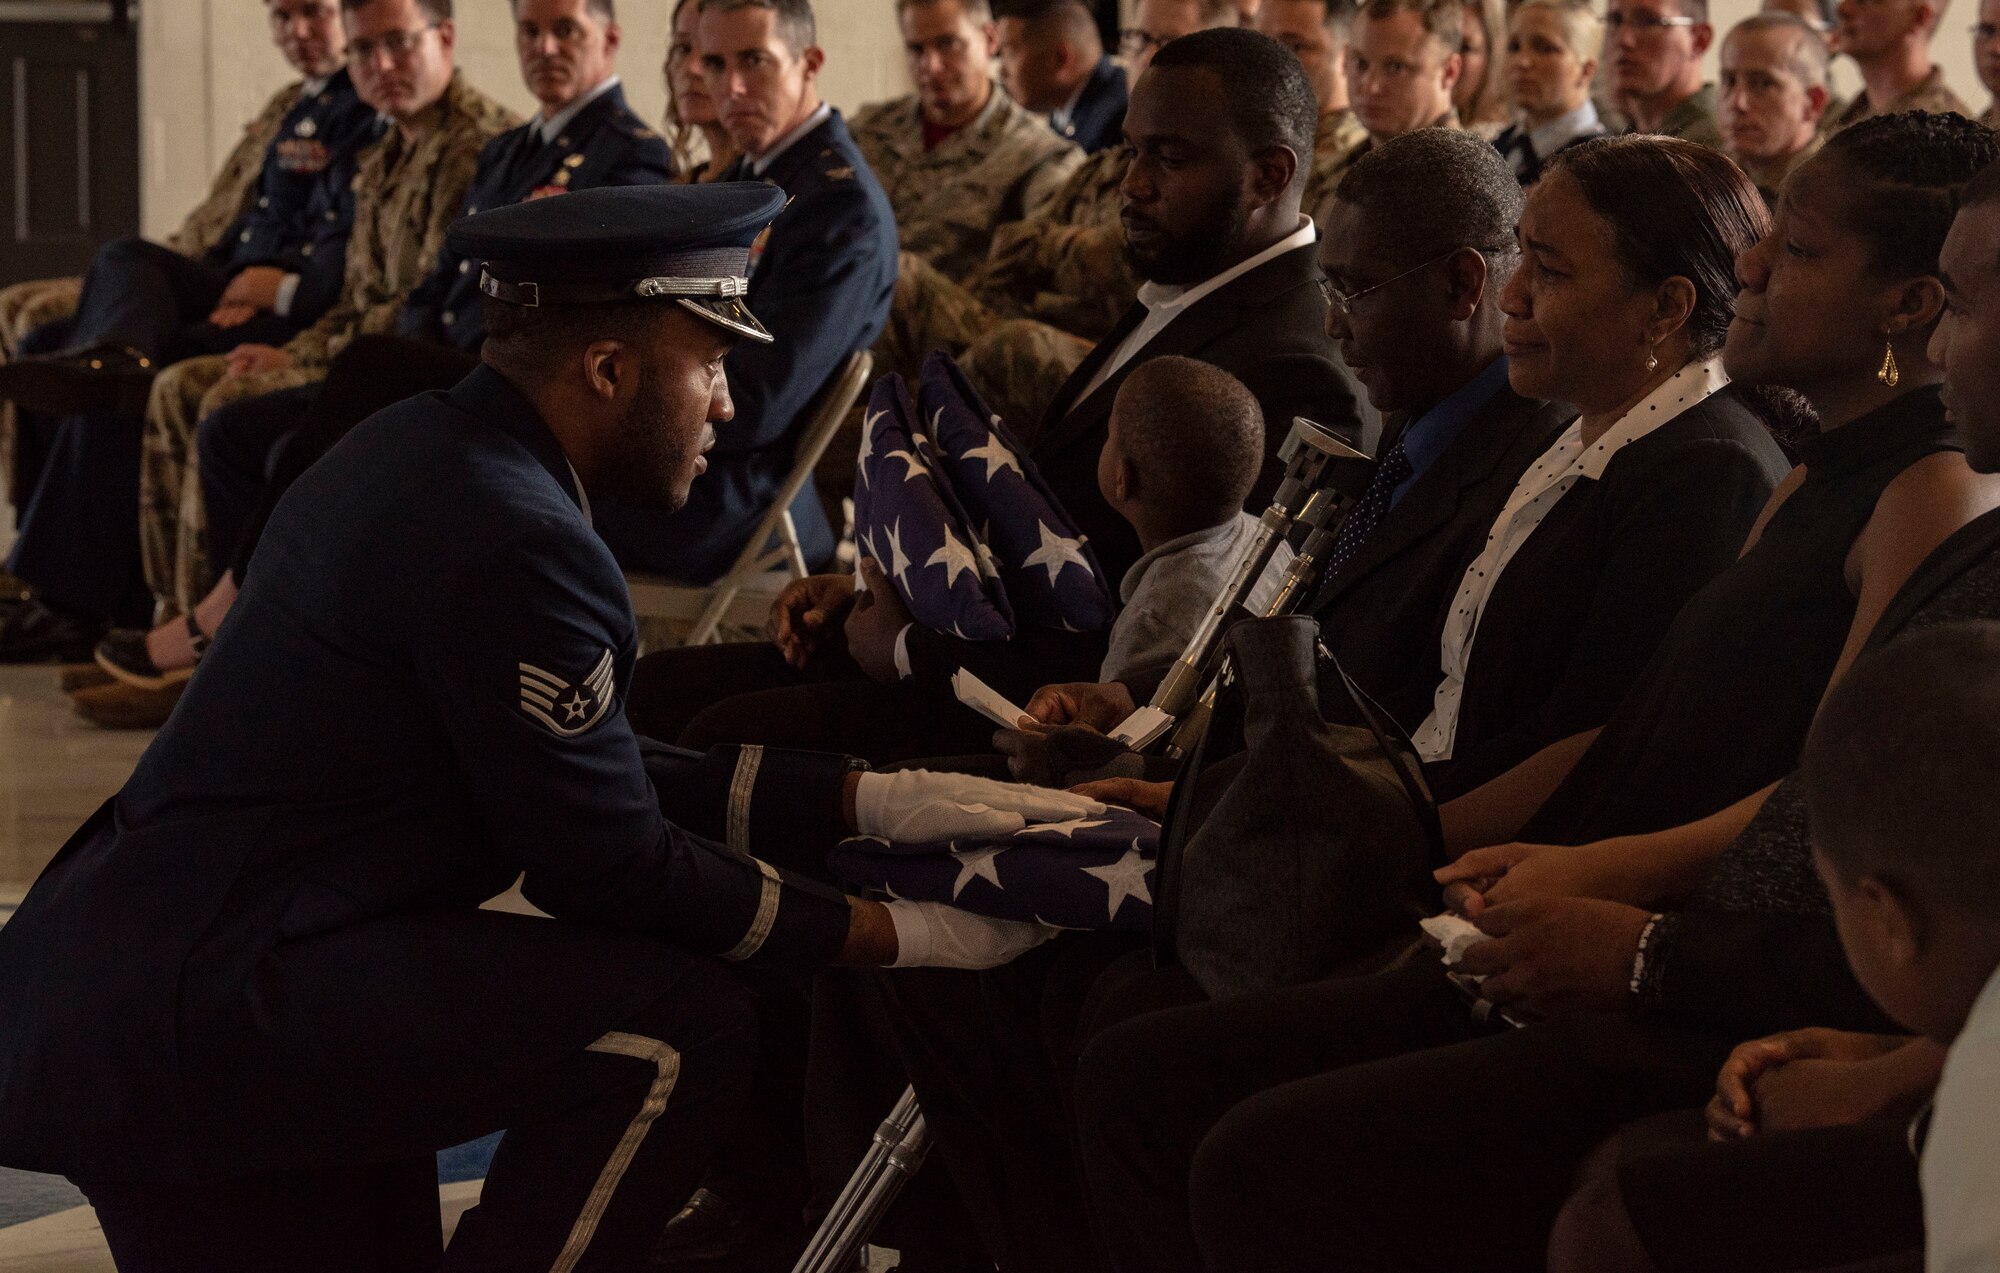 The American flag is presented to the son of Staff Sgt. Amalia Joseph, 20th Component Maintenance Squadron electronic warfare journeyman, during a memorial service at Shaw Air Force Base, South Carolina, June 7, 2019.